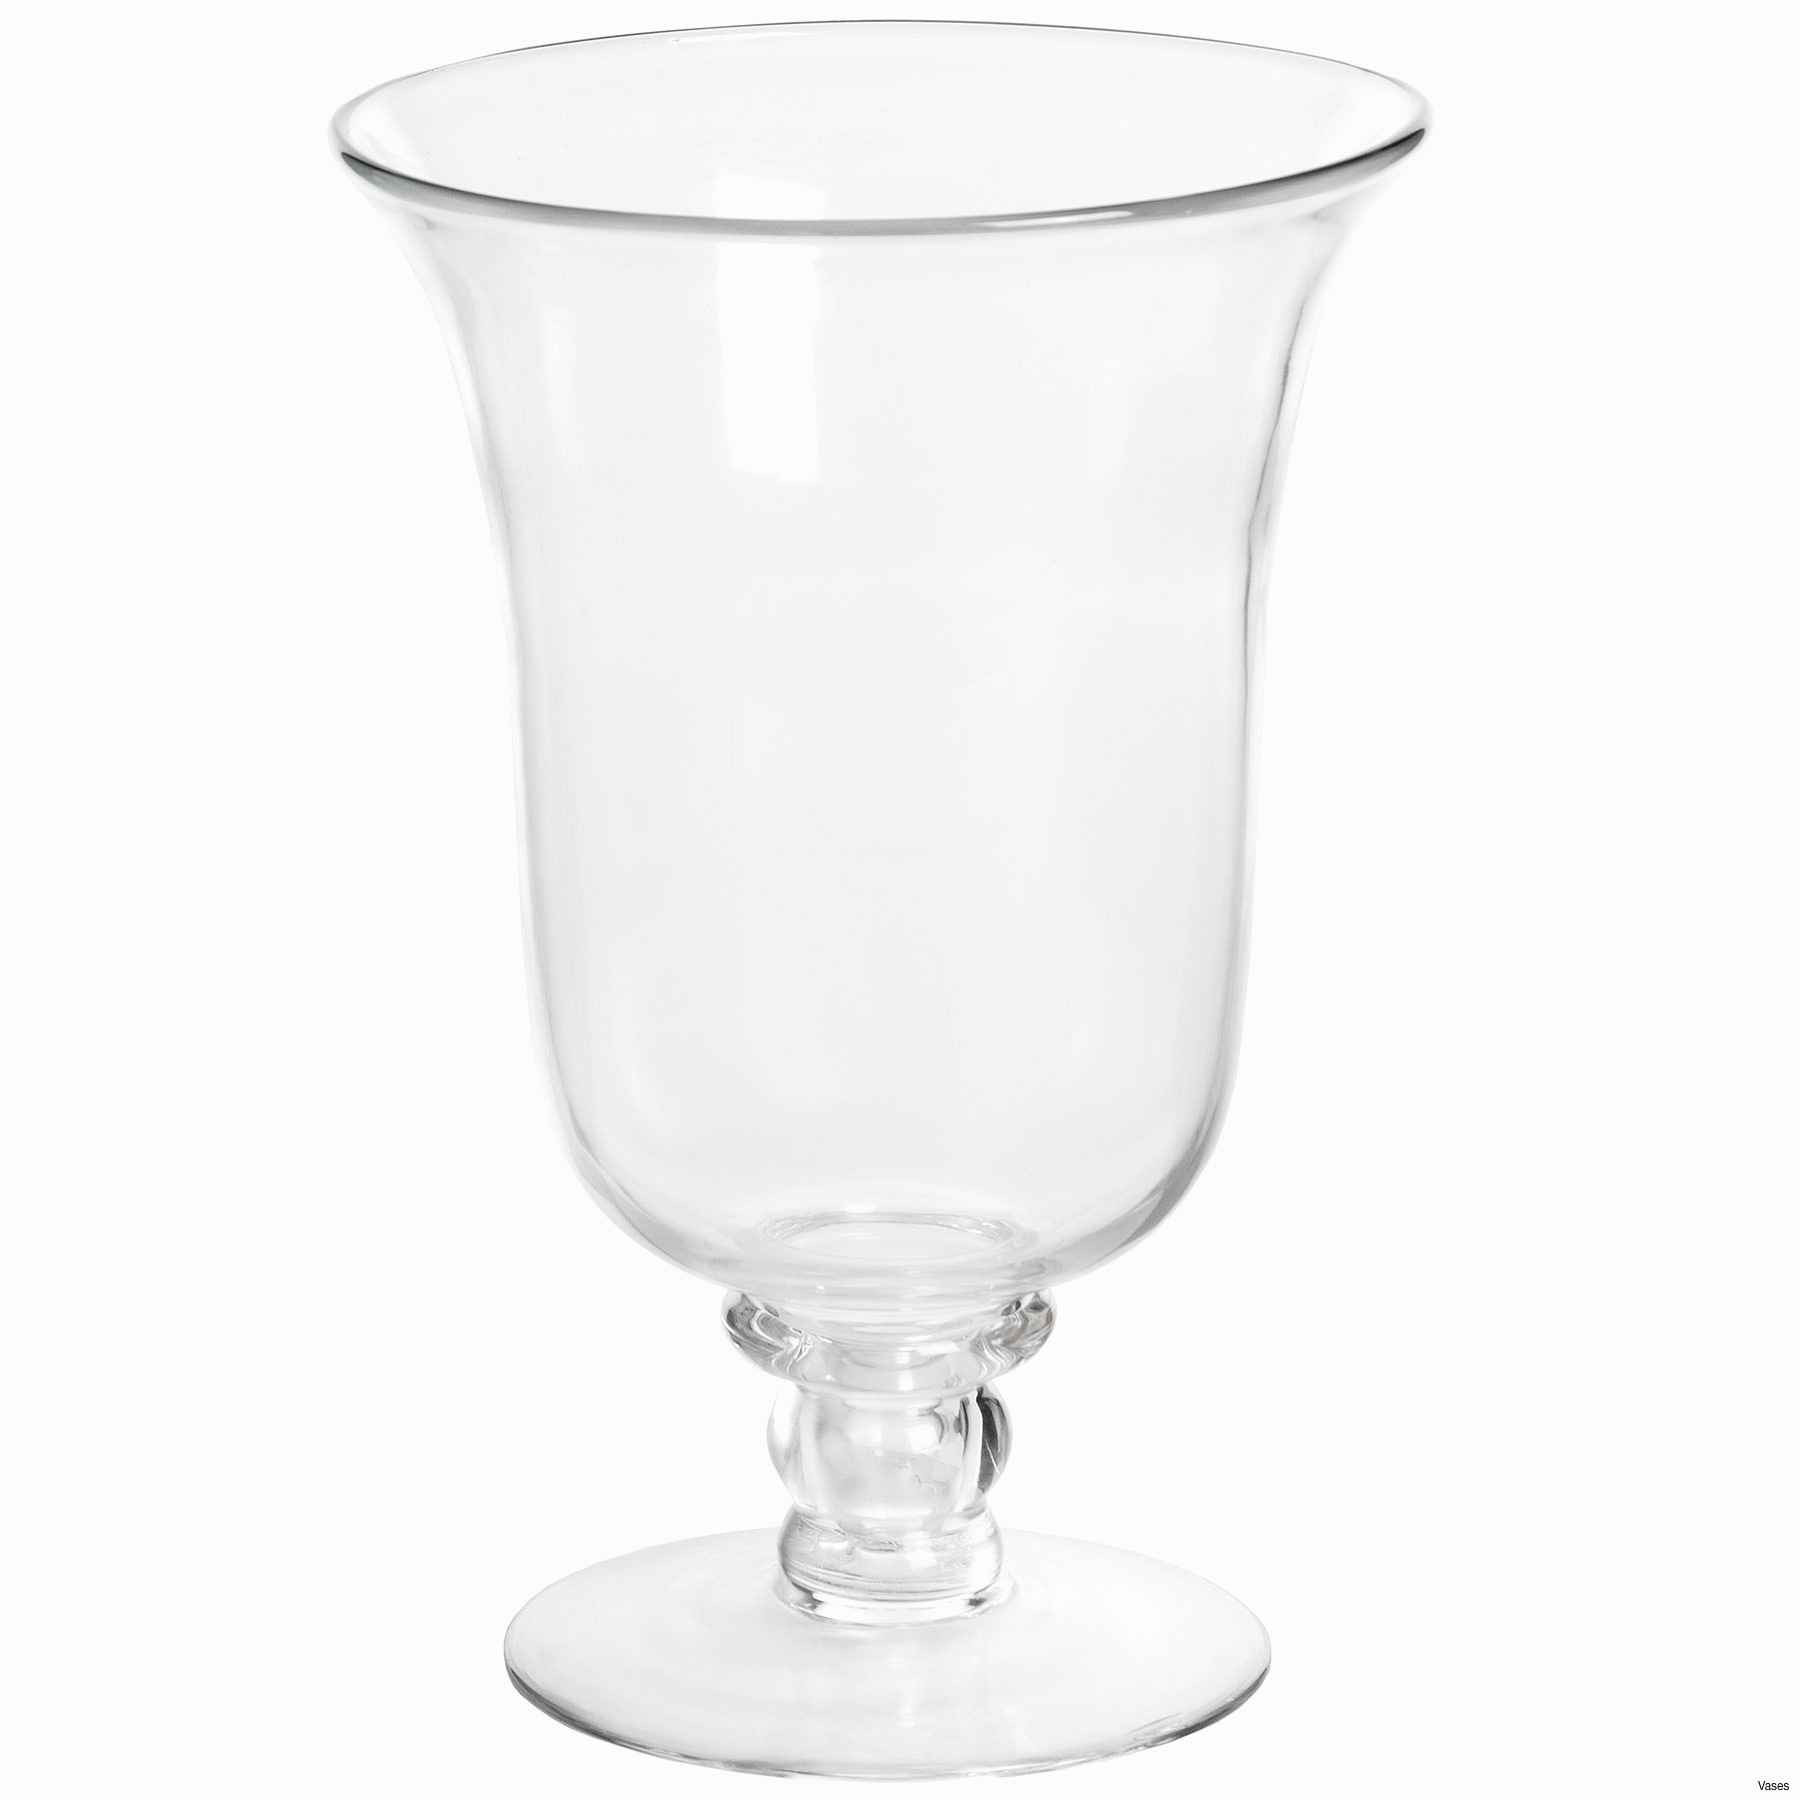 30 Famous Glass Vases for Weddings 2024 free download glass vases for weddings of candle stands wholesale lovely faux crystal candle holders alive pertaining to candle stands wholesale lovely faux crystal candle holders alive vases gold tall jp